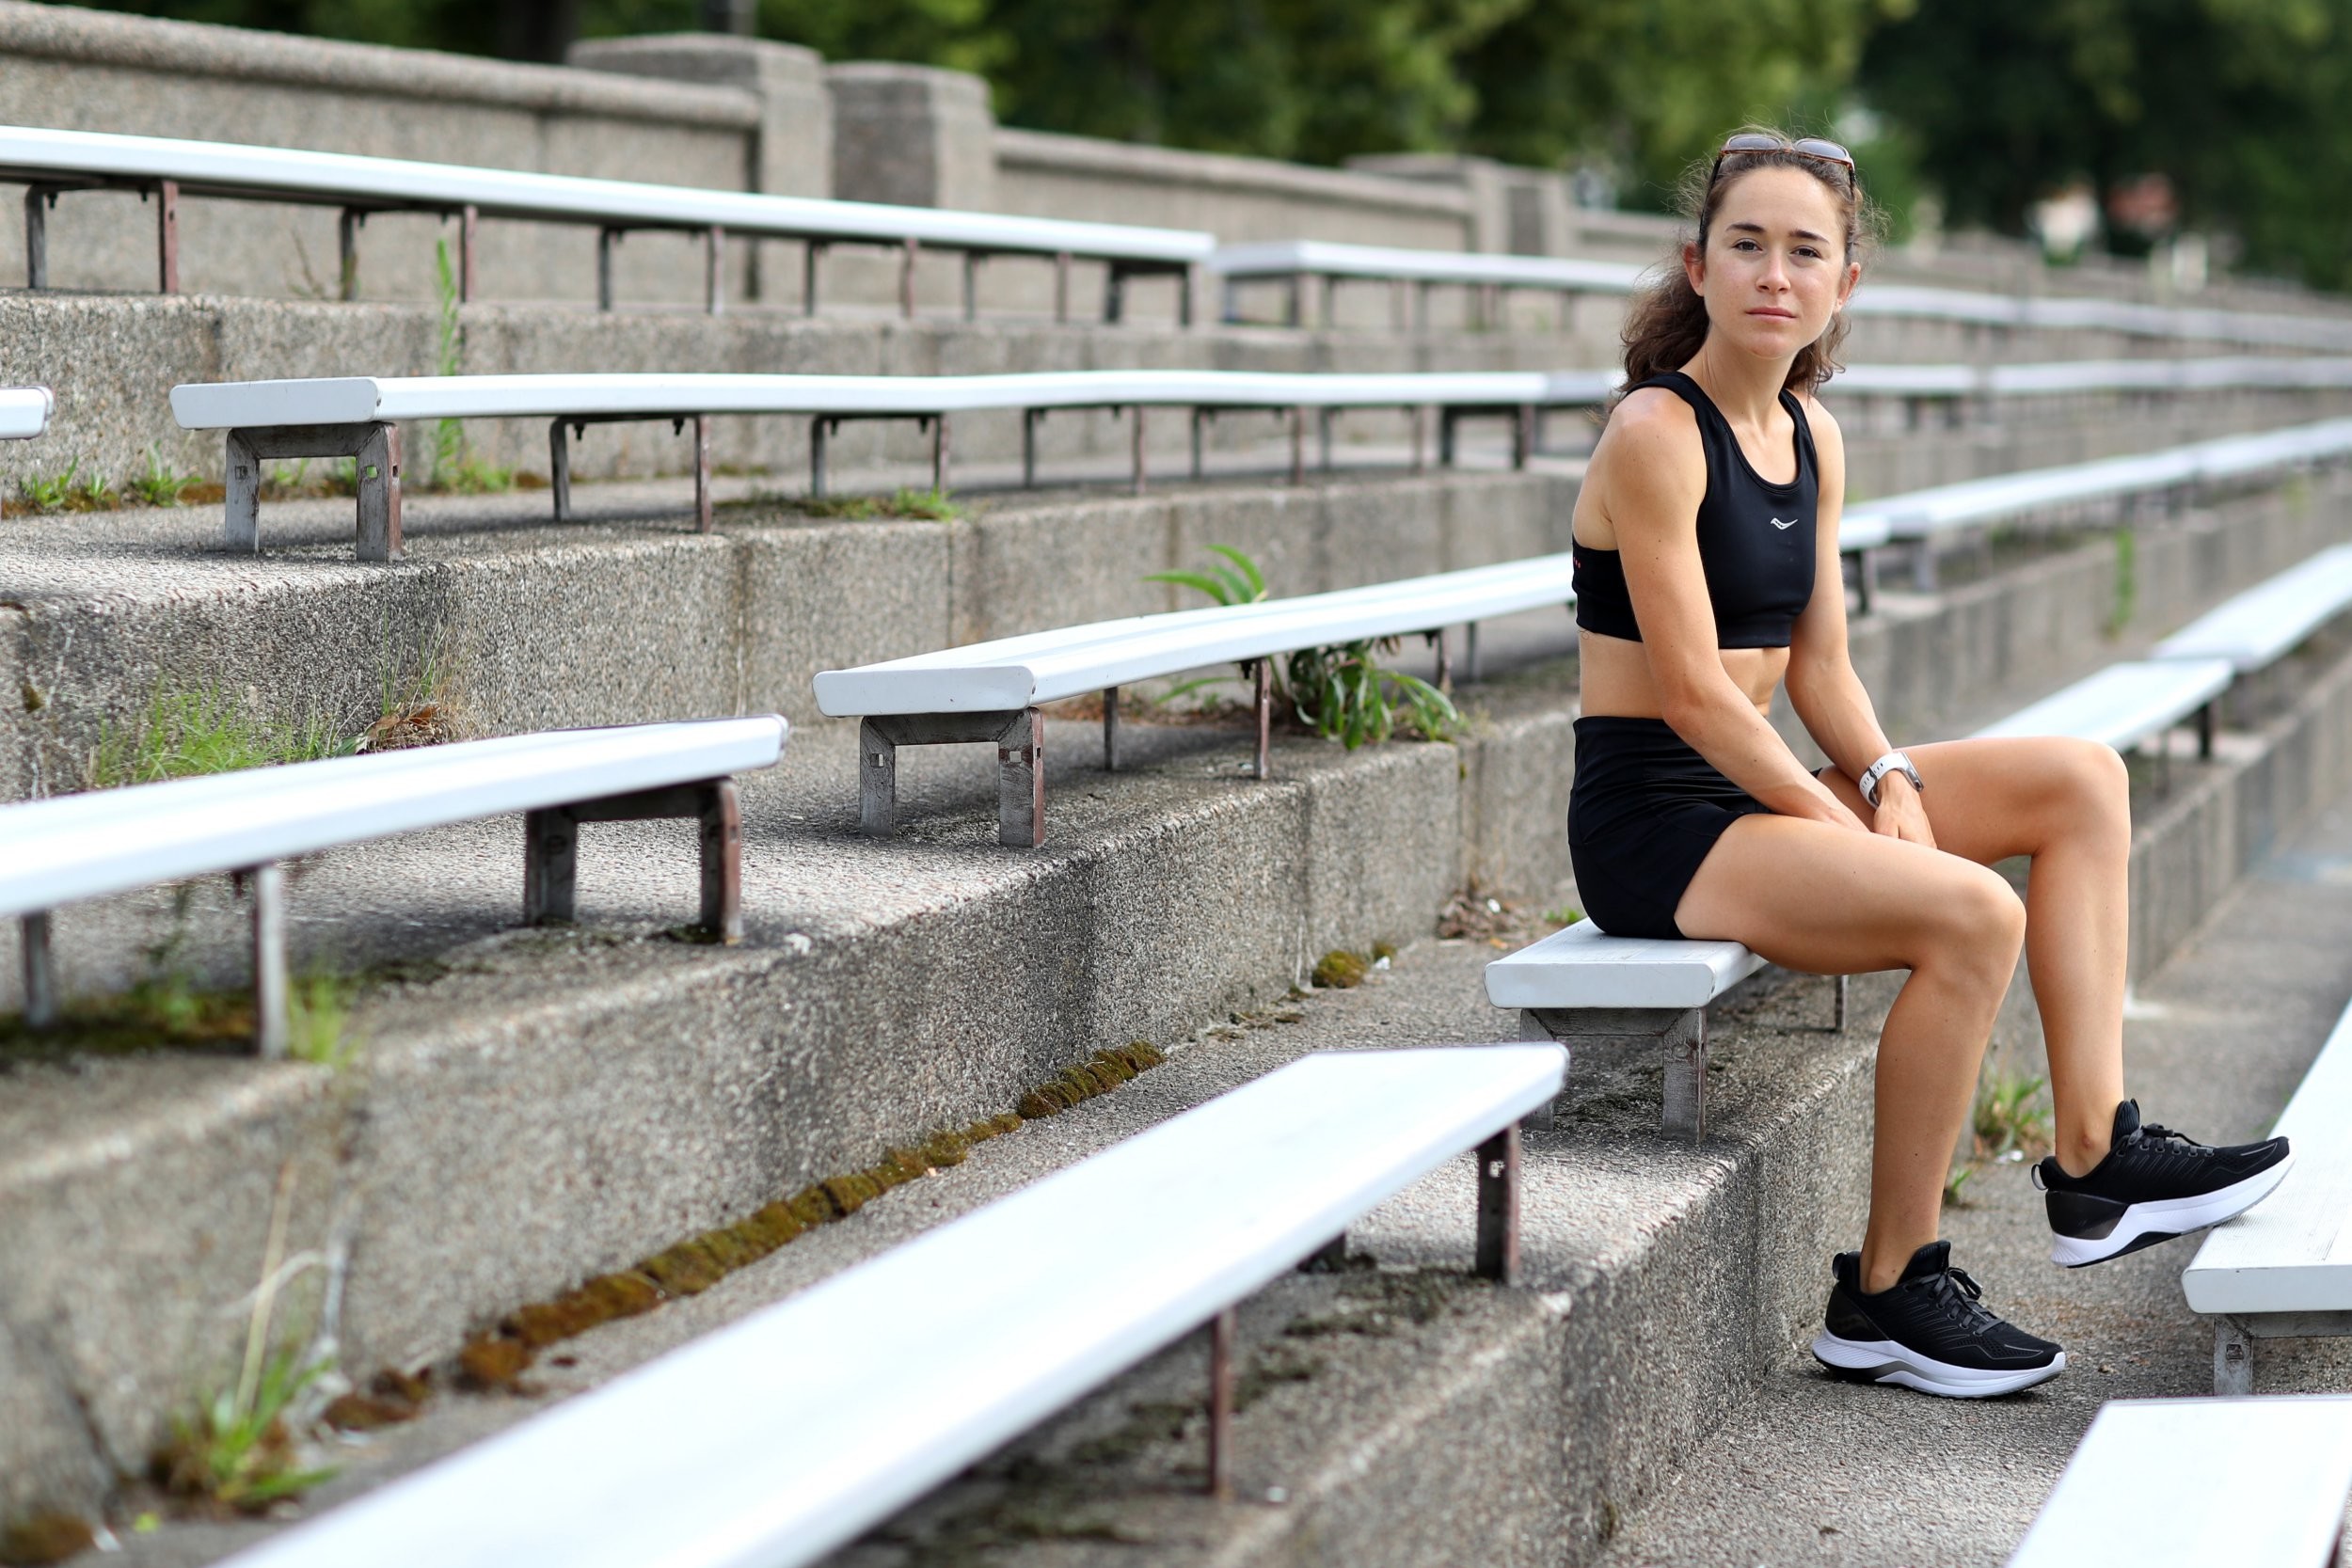 Molly Seidel and Aisha Praught-Leer have signed with Puma
